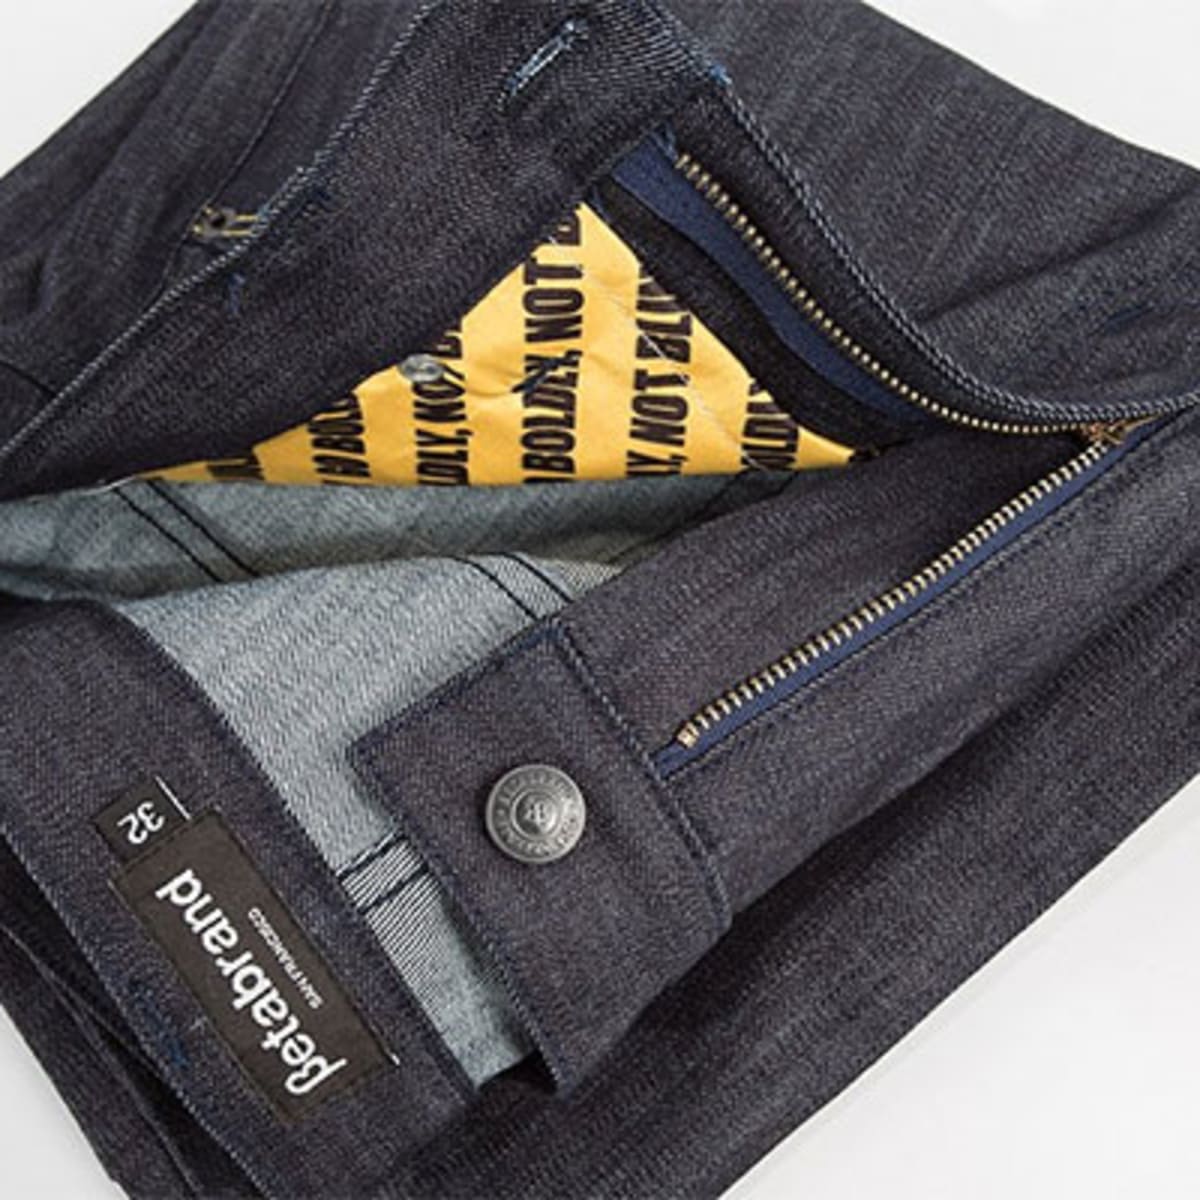 Hack-Proof Pants Protect Your Credit Cards from Digital Pickpockets -  TheStreet